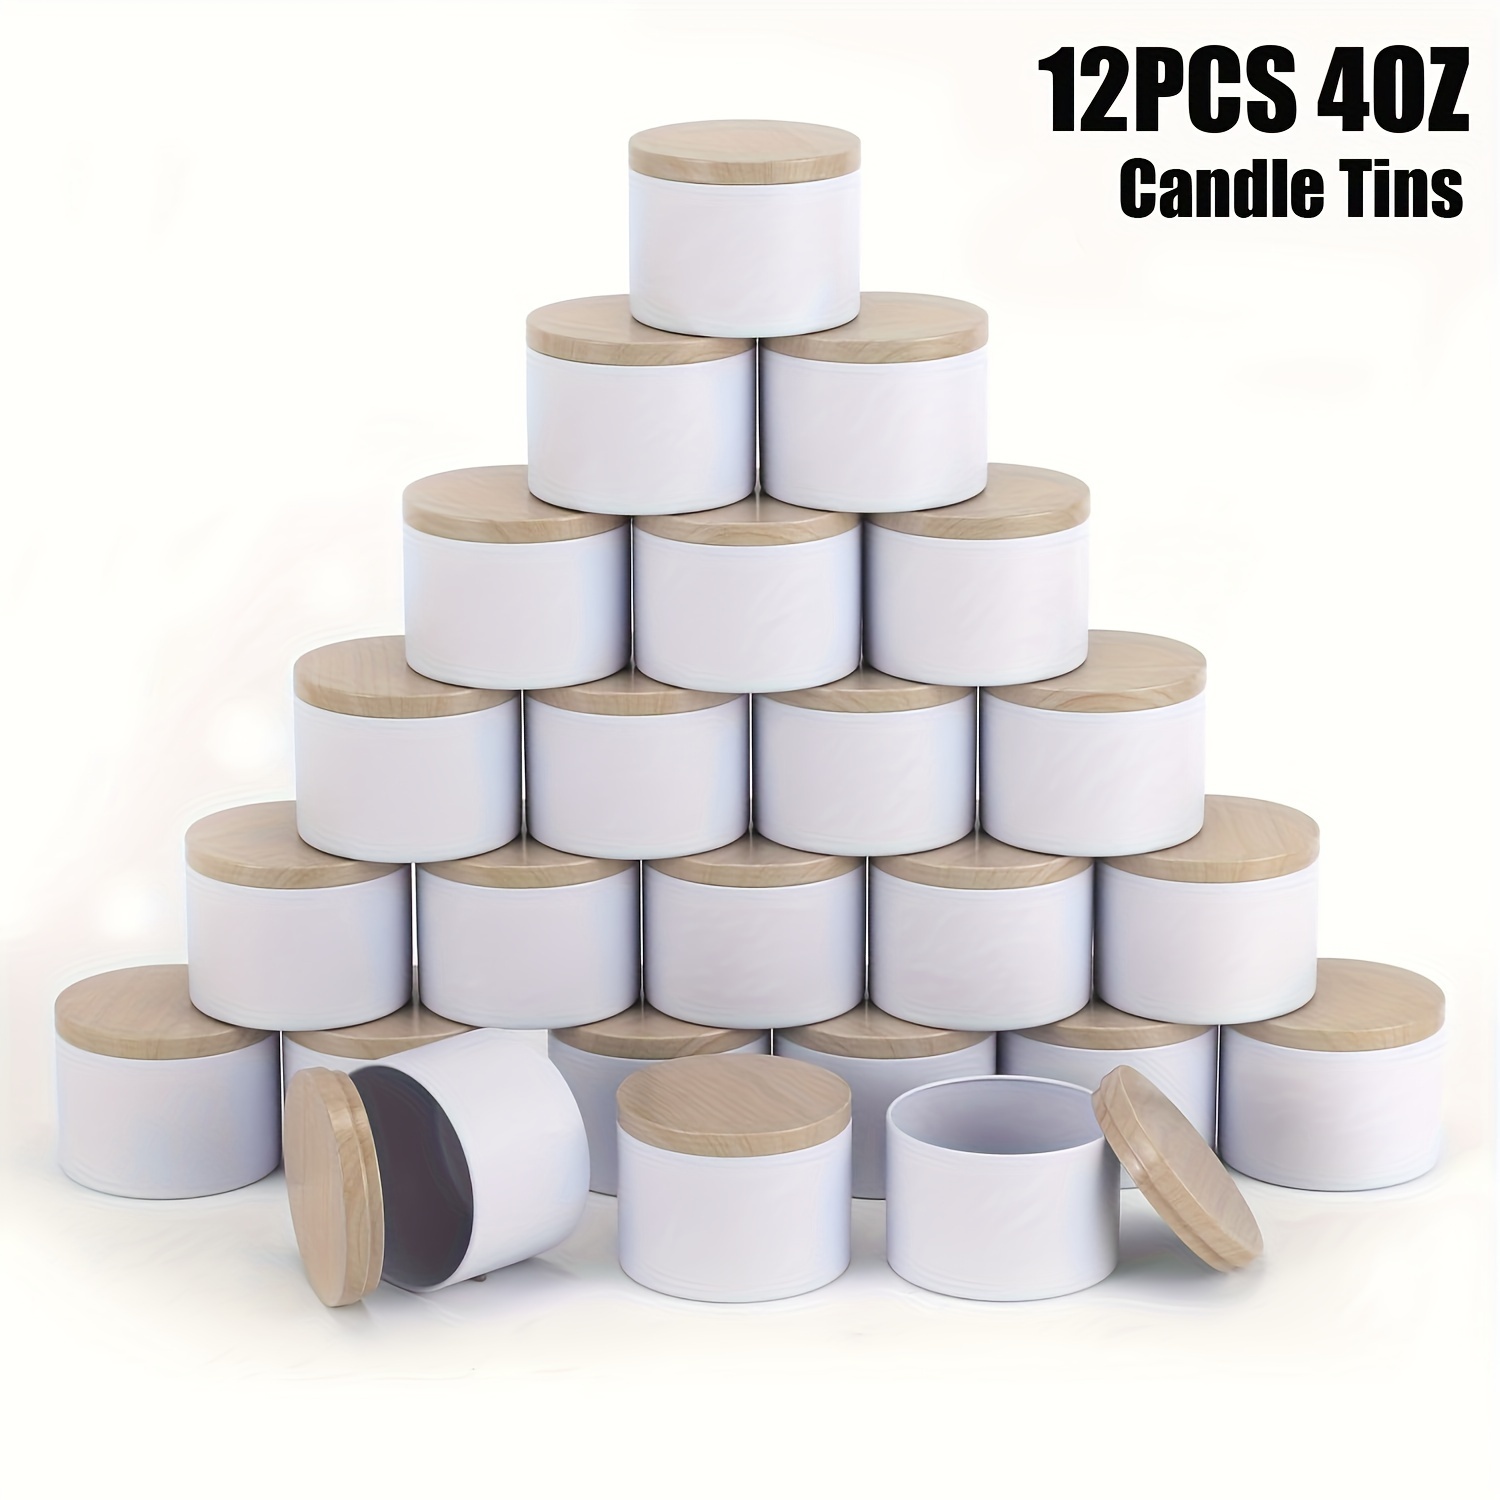 

12pcs 4oz White Candle Tins, Candle Jars, Candle Containers With Lids, For Candles Making, Arts & Crafts, Storage Jar, Gifts